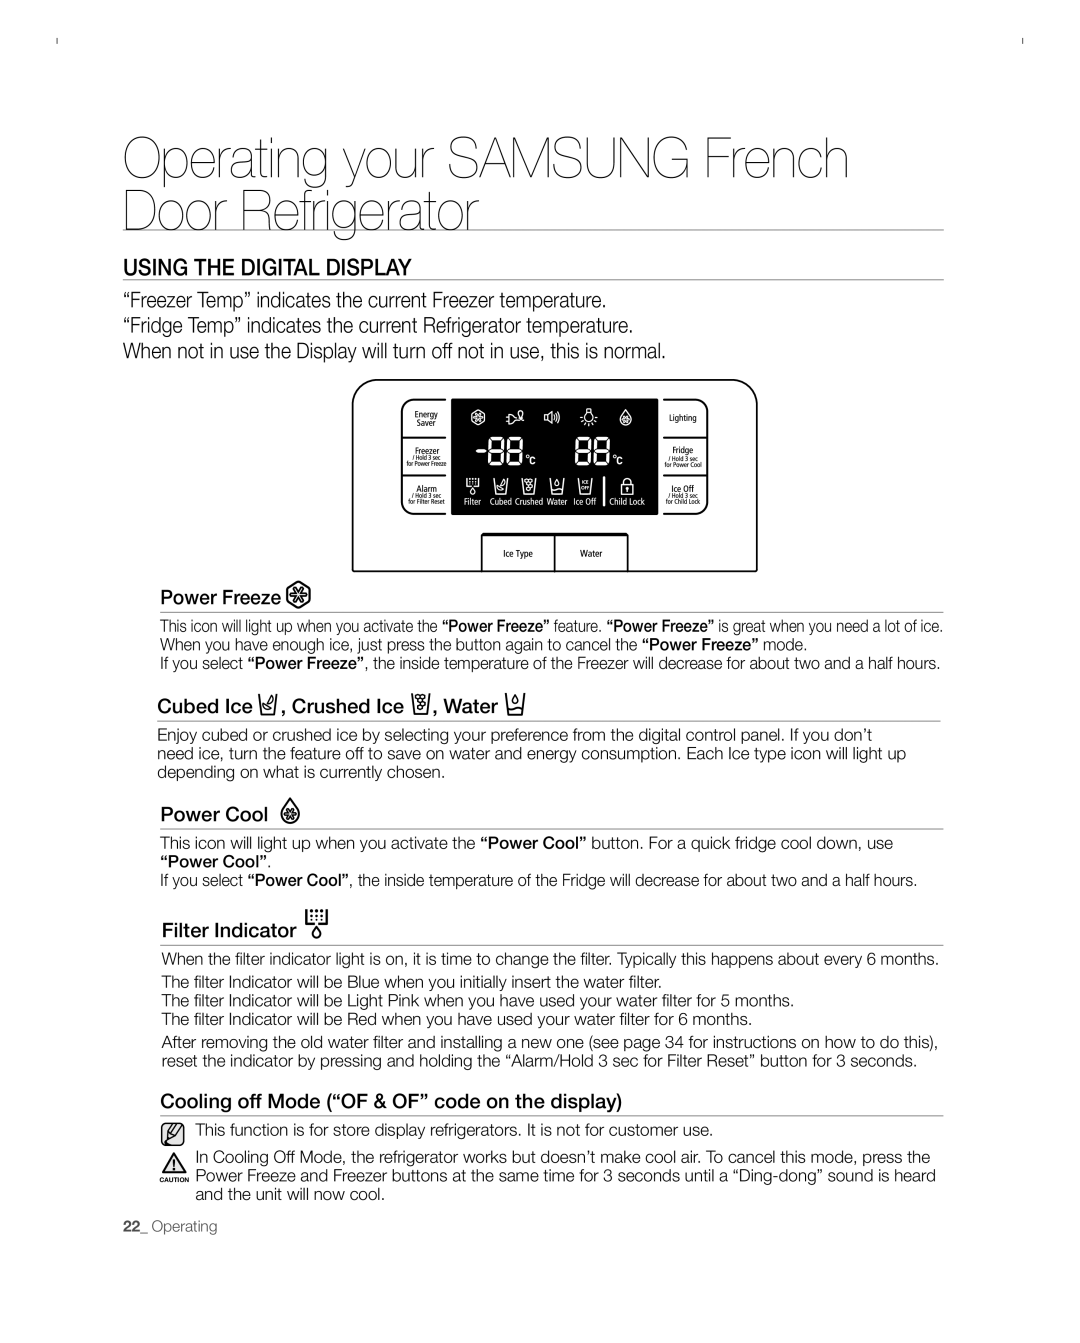 Samsung RFG297ACBP Using The Digital Display, Operating your SAMSUNG French Door Refrigerator, Power Freeze, Power Cool 